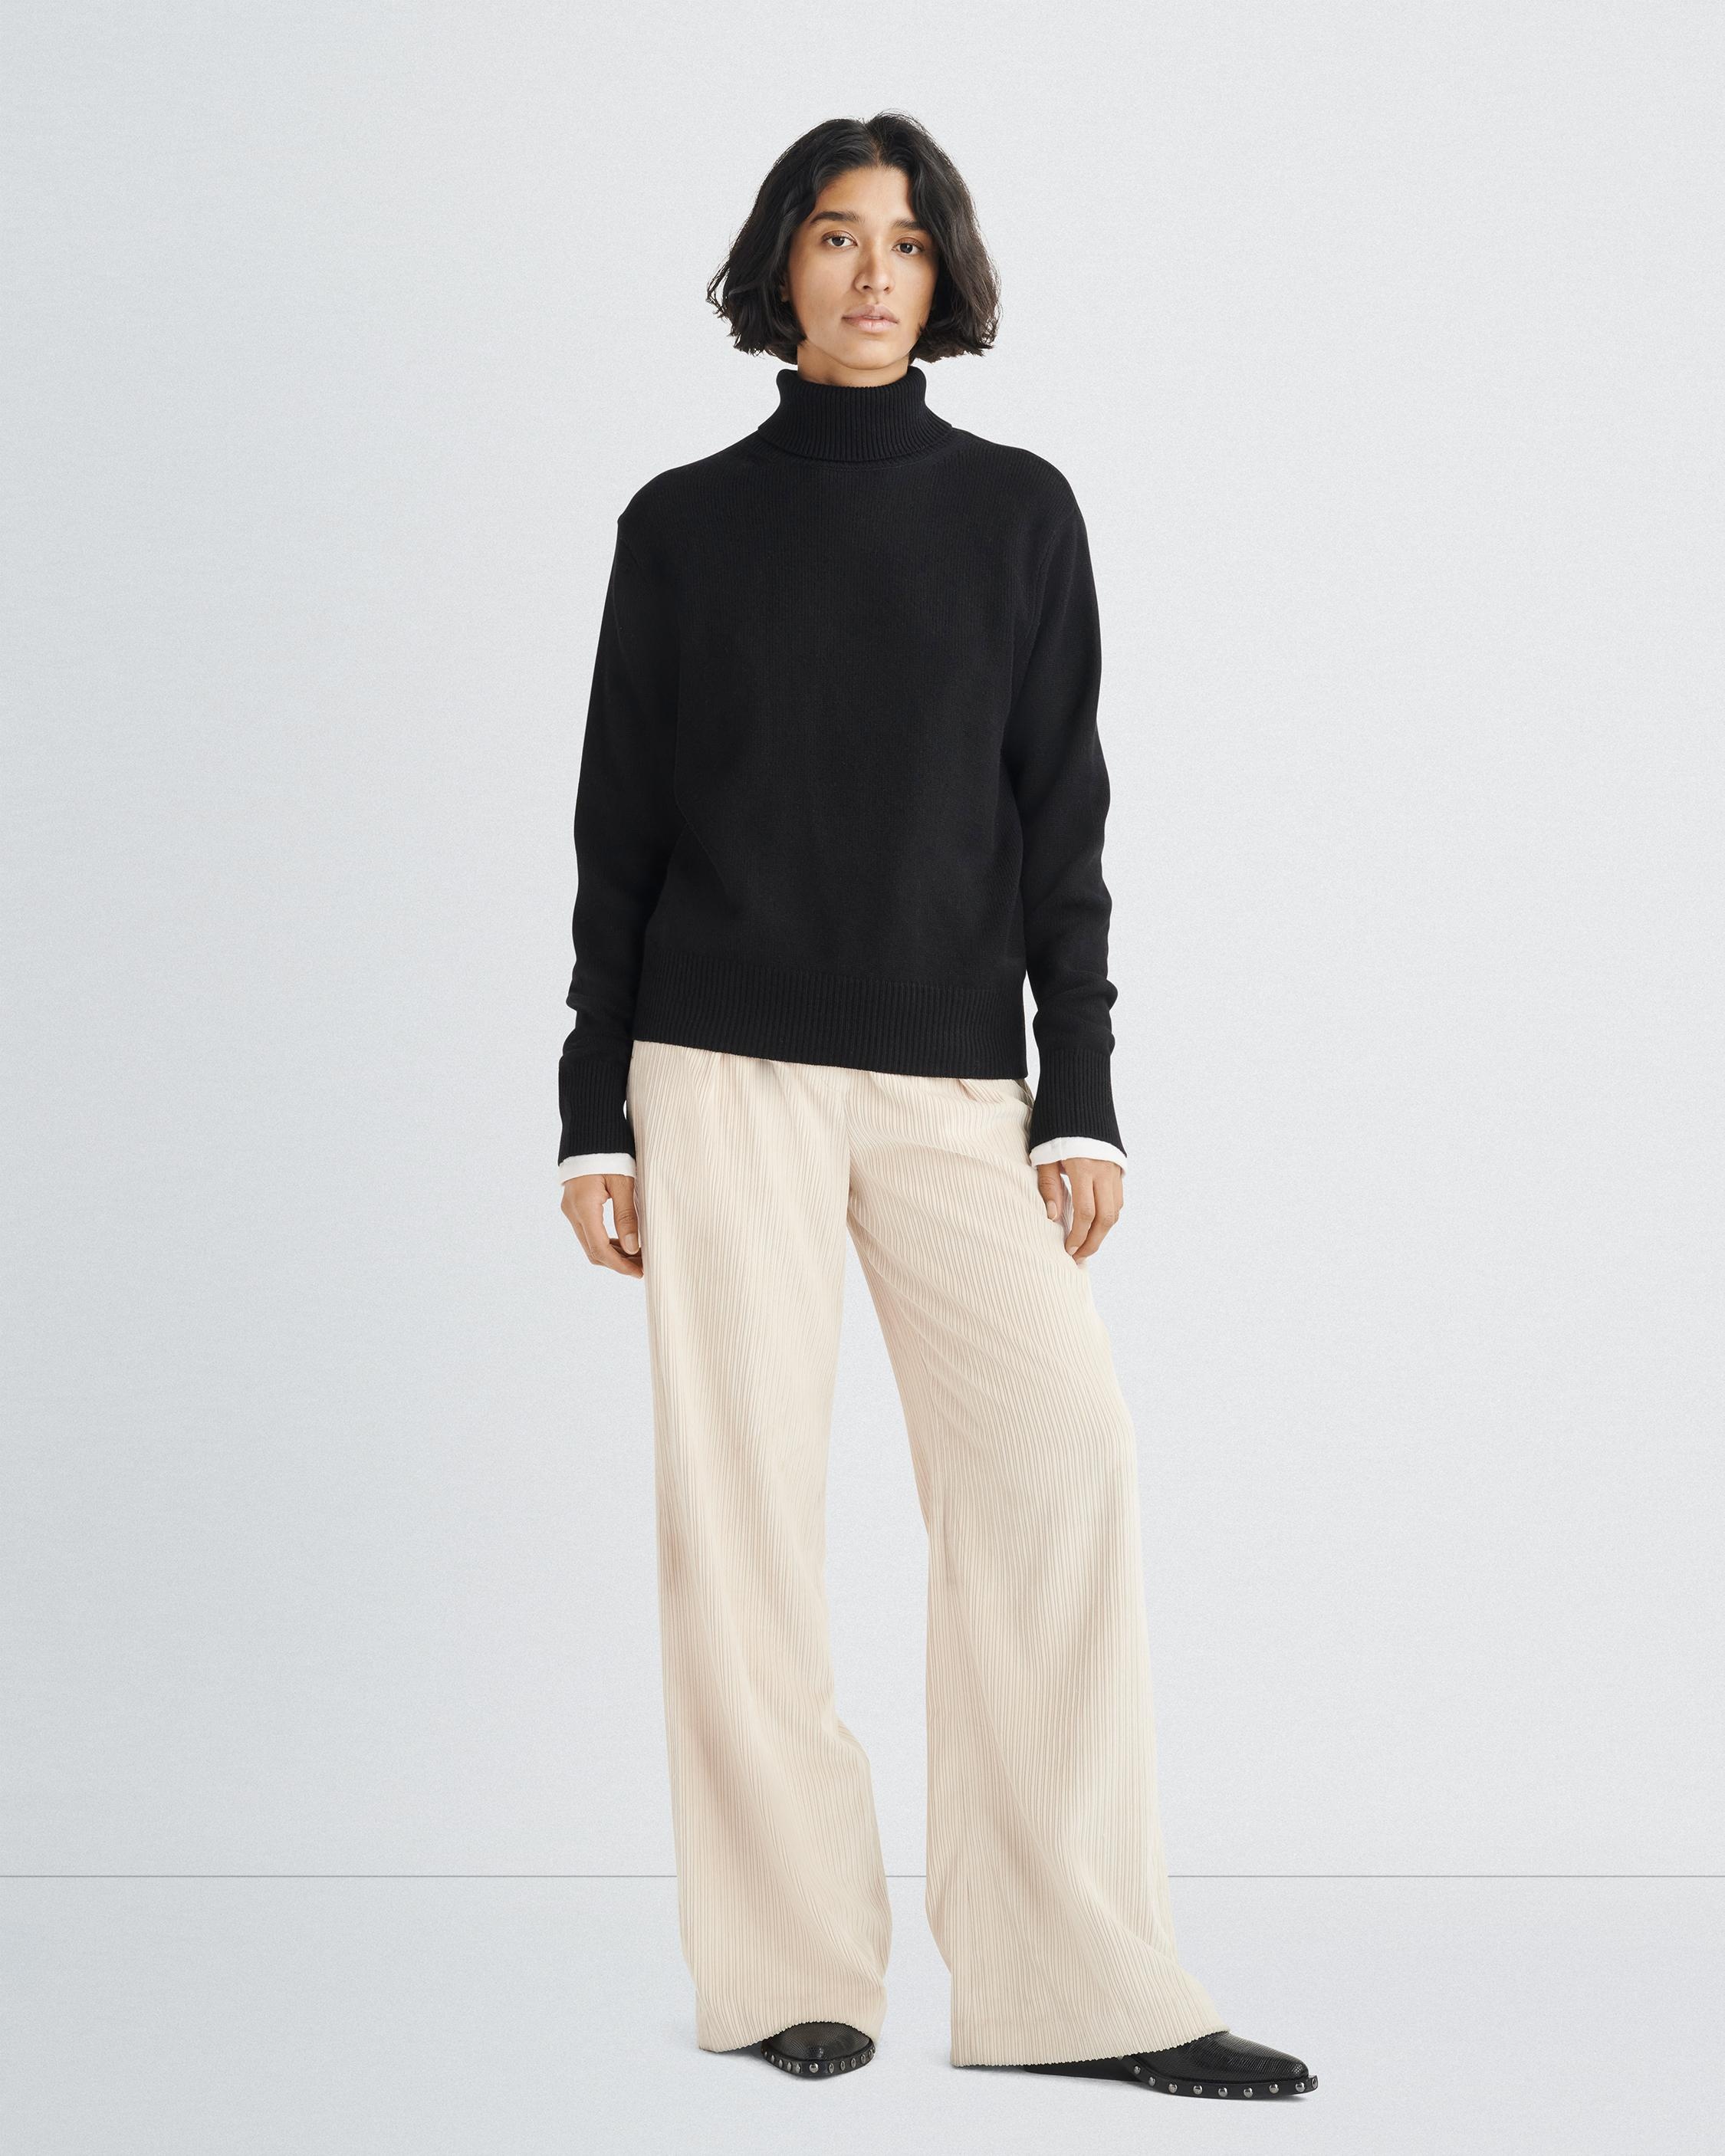 Talan Cashmere Turtleneck
Relaxed Fit - 3